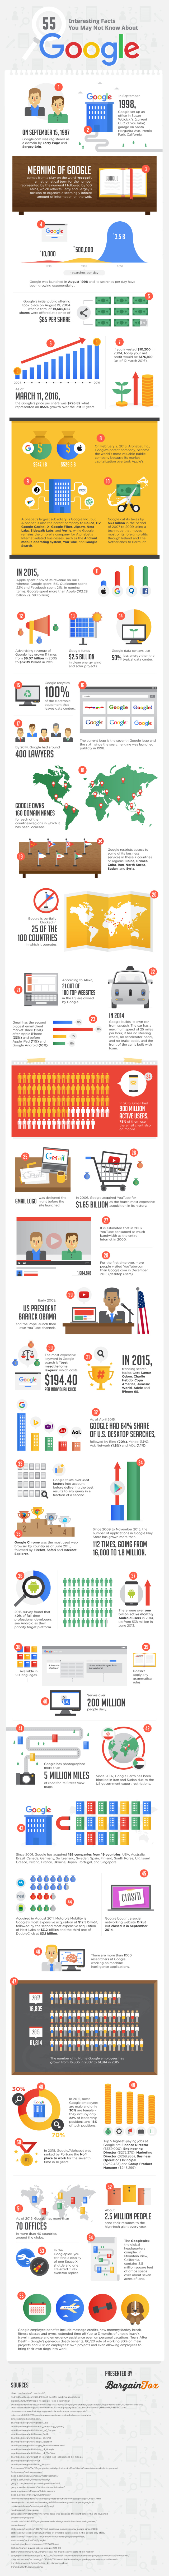 55-surprising-facts-about-google-why-website-owners-should-care